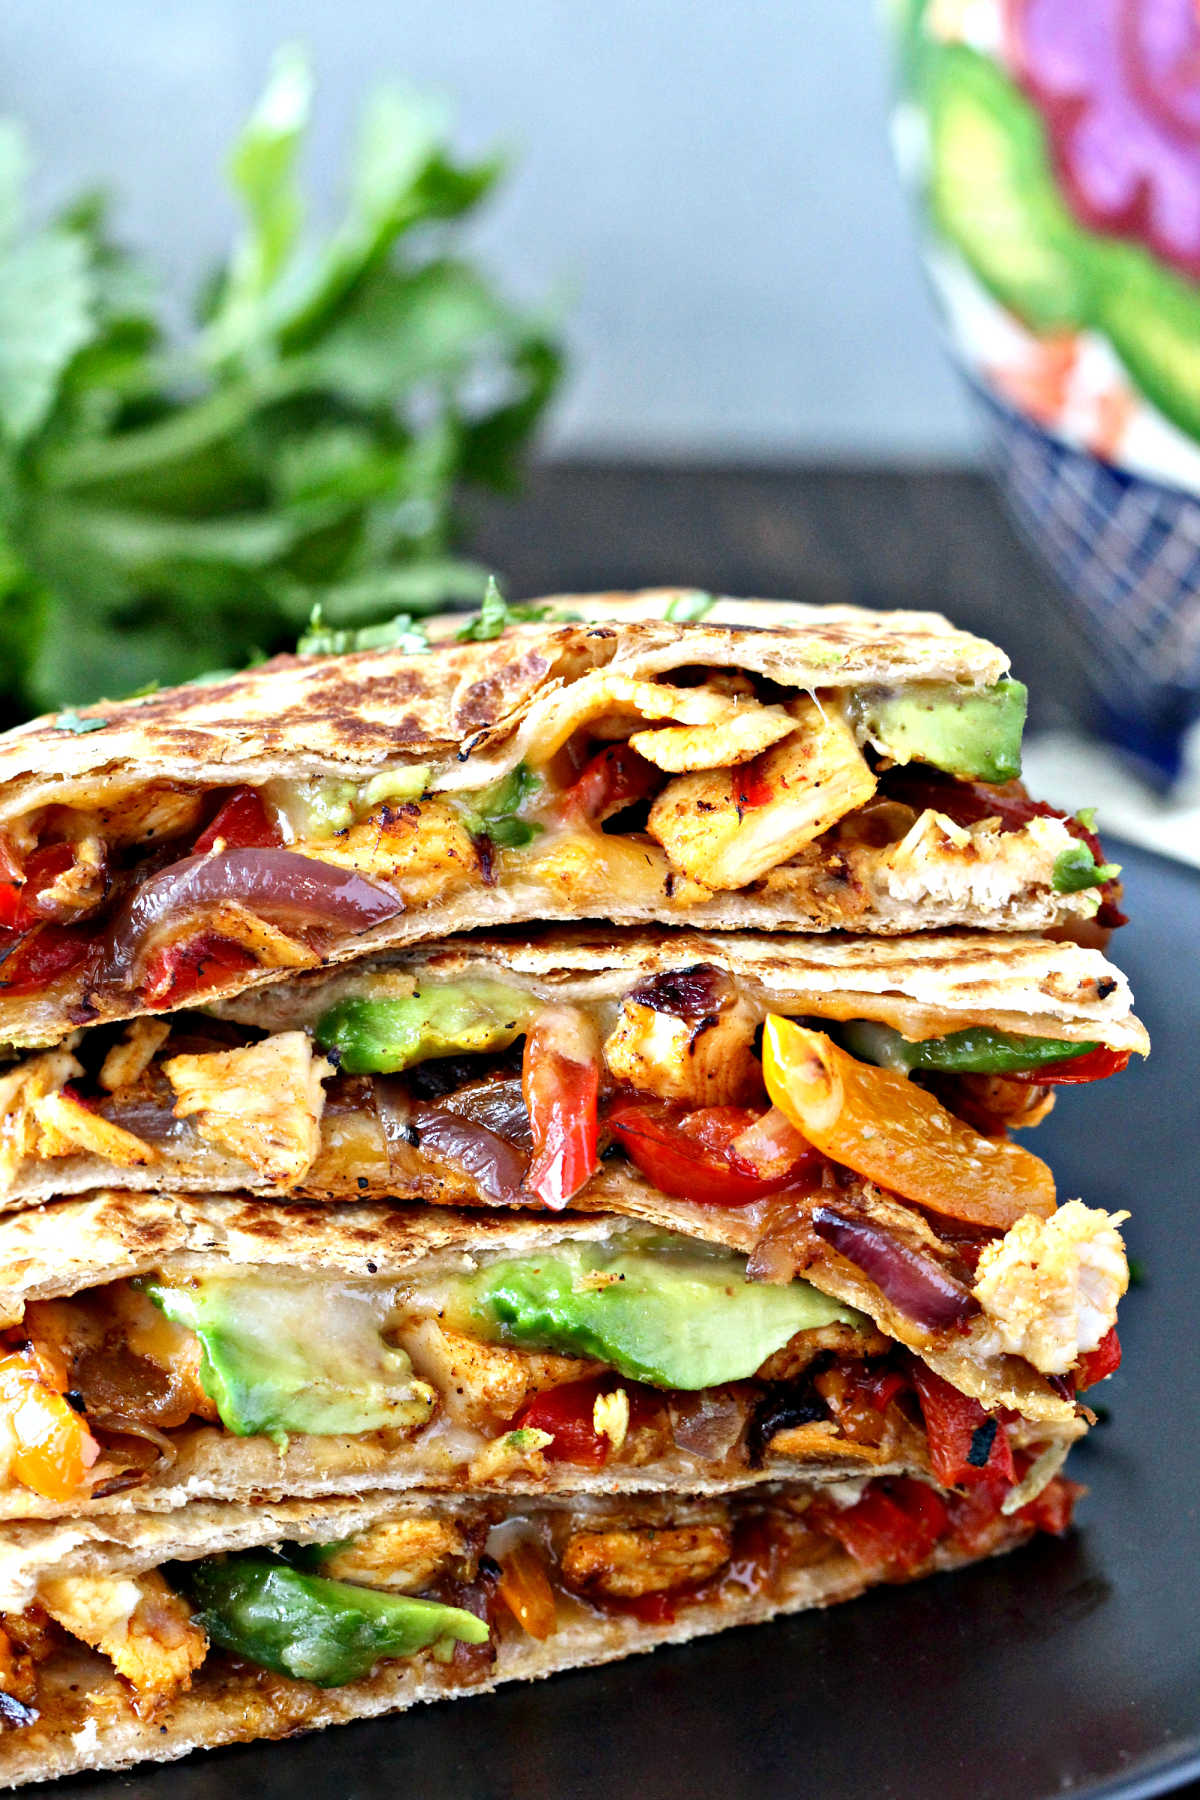 Chicken quesadillas stacked on top of each other so you can see all of the ingredients.